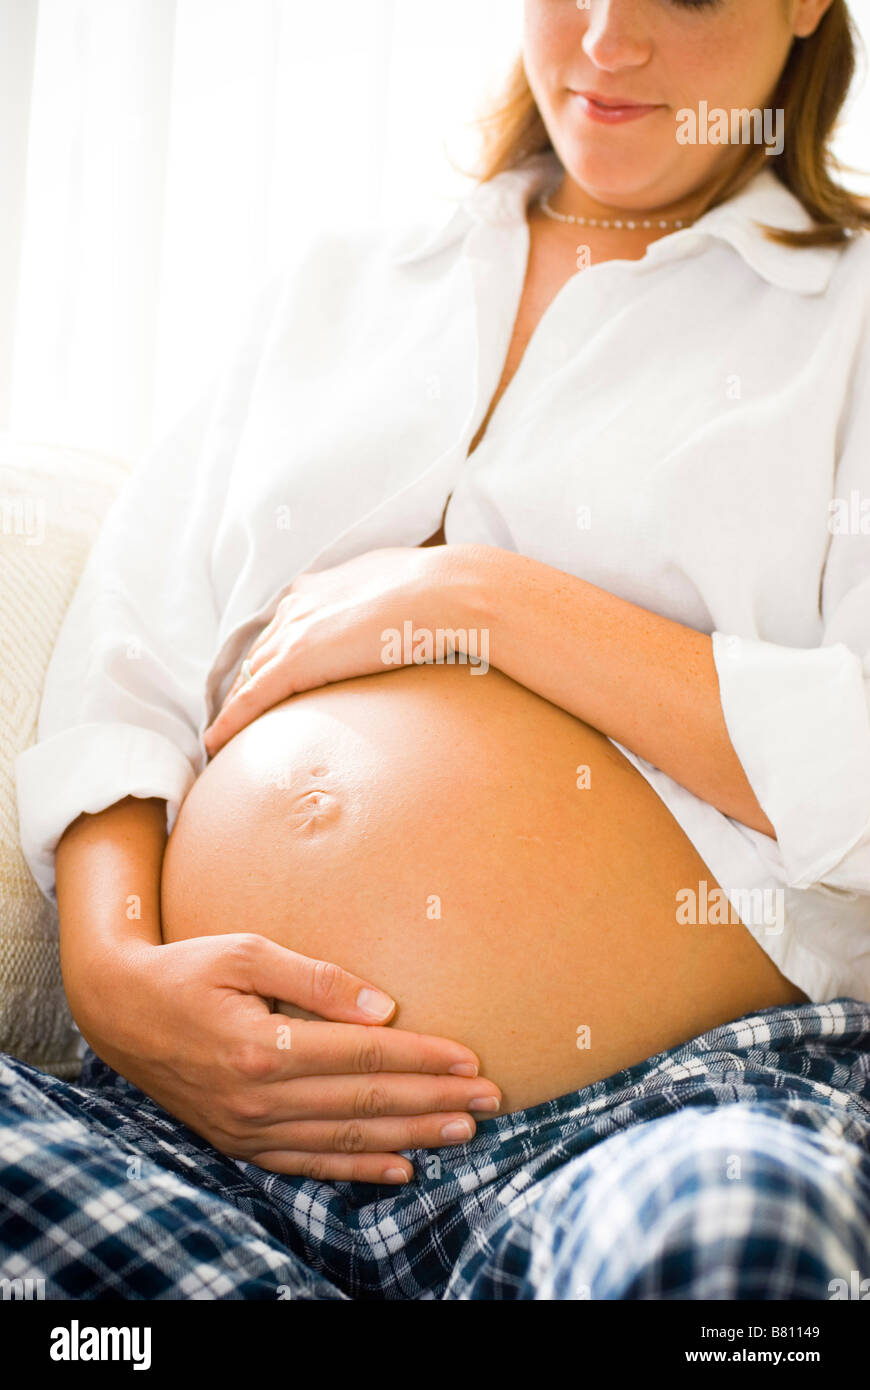 Pregnant woman sitting on couch Banque D'Images